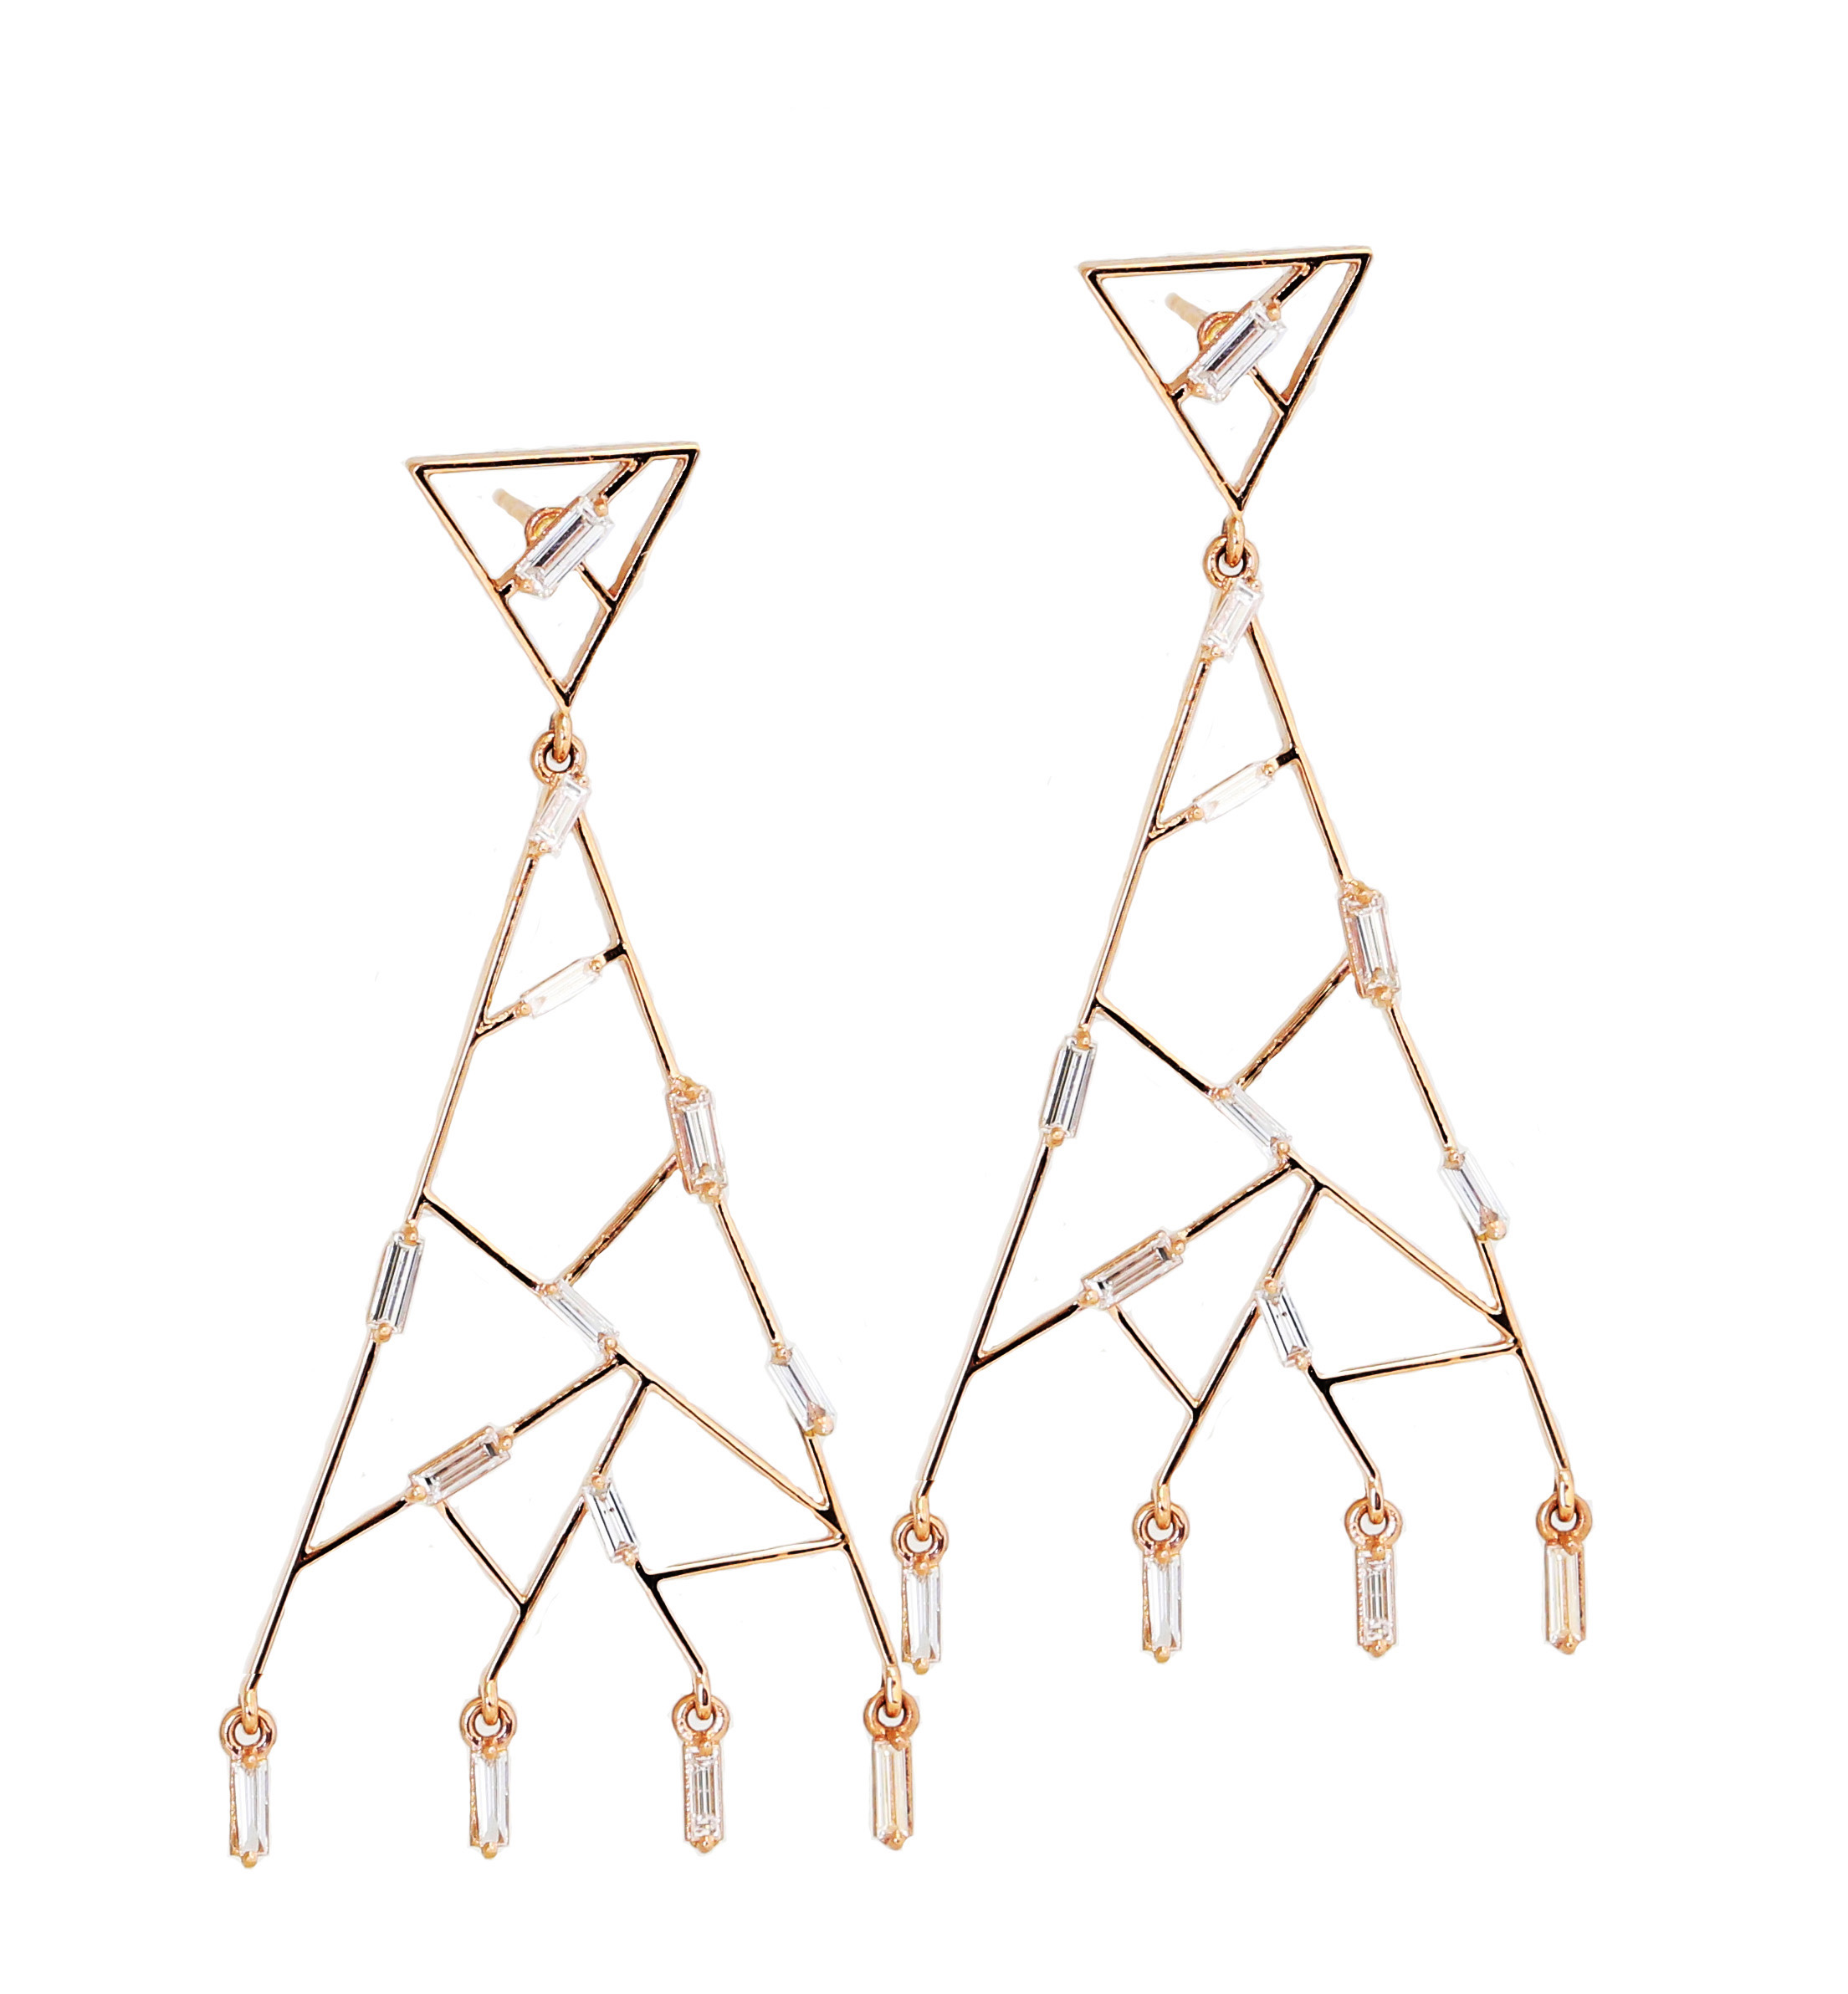  18k gold Baguette Post Chandelier earrings from the Fireworks collection, $6,160.&nbsp; 